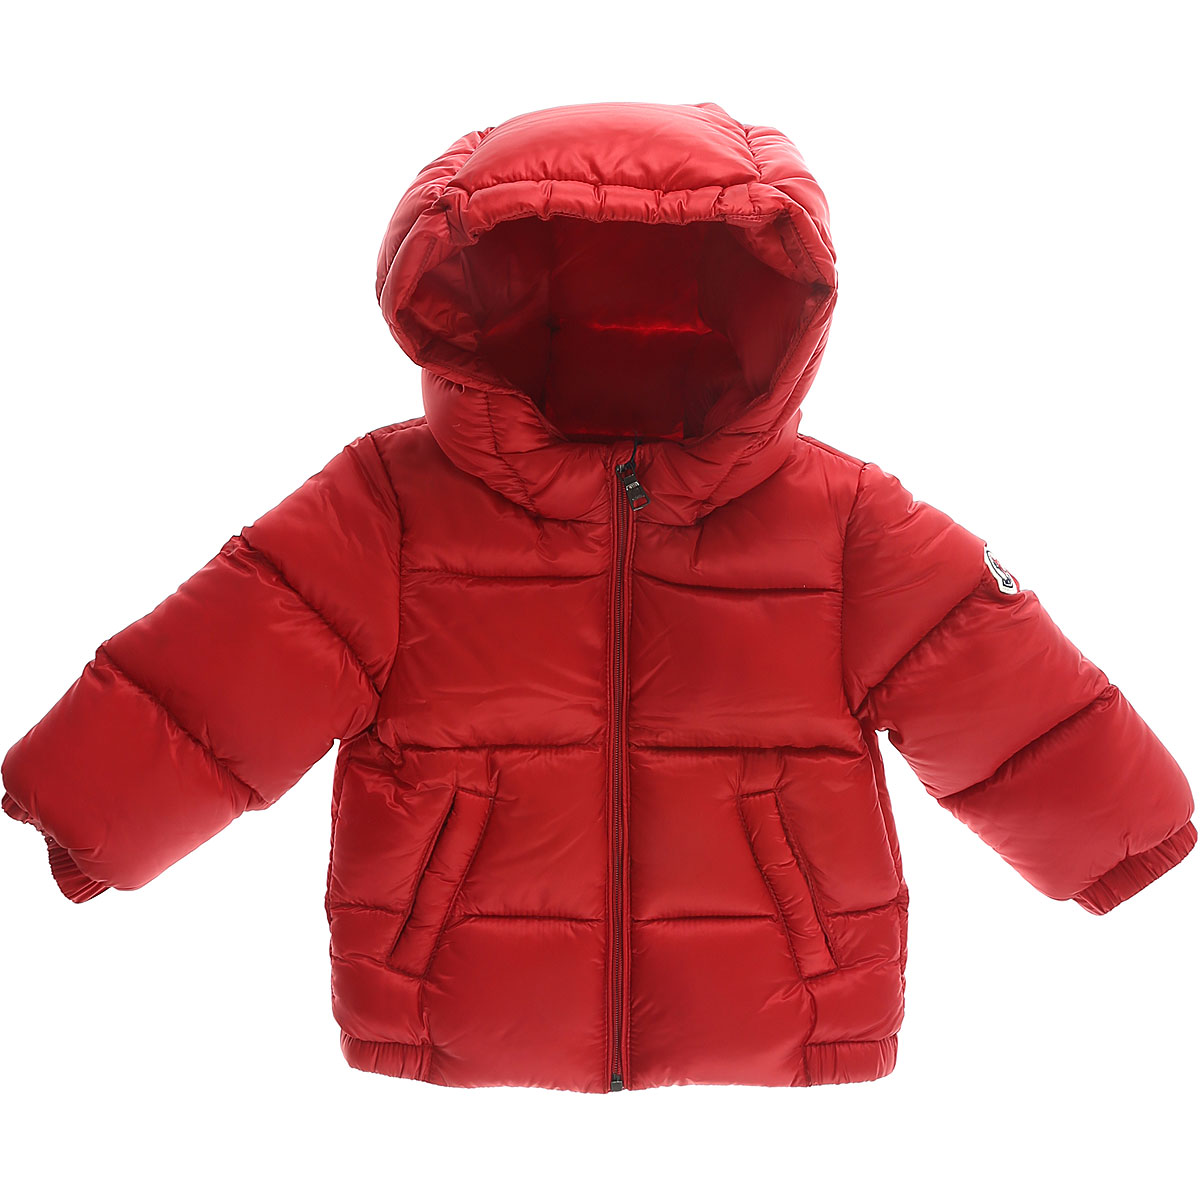 Baby Boy Clothing Moncler, Style code: 4183549-5334-455